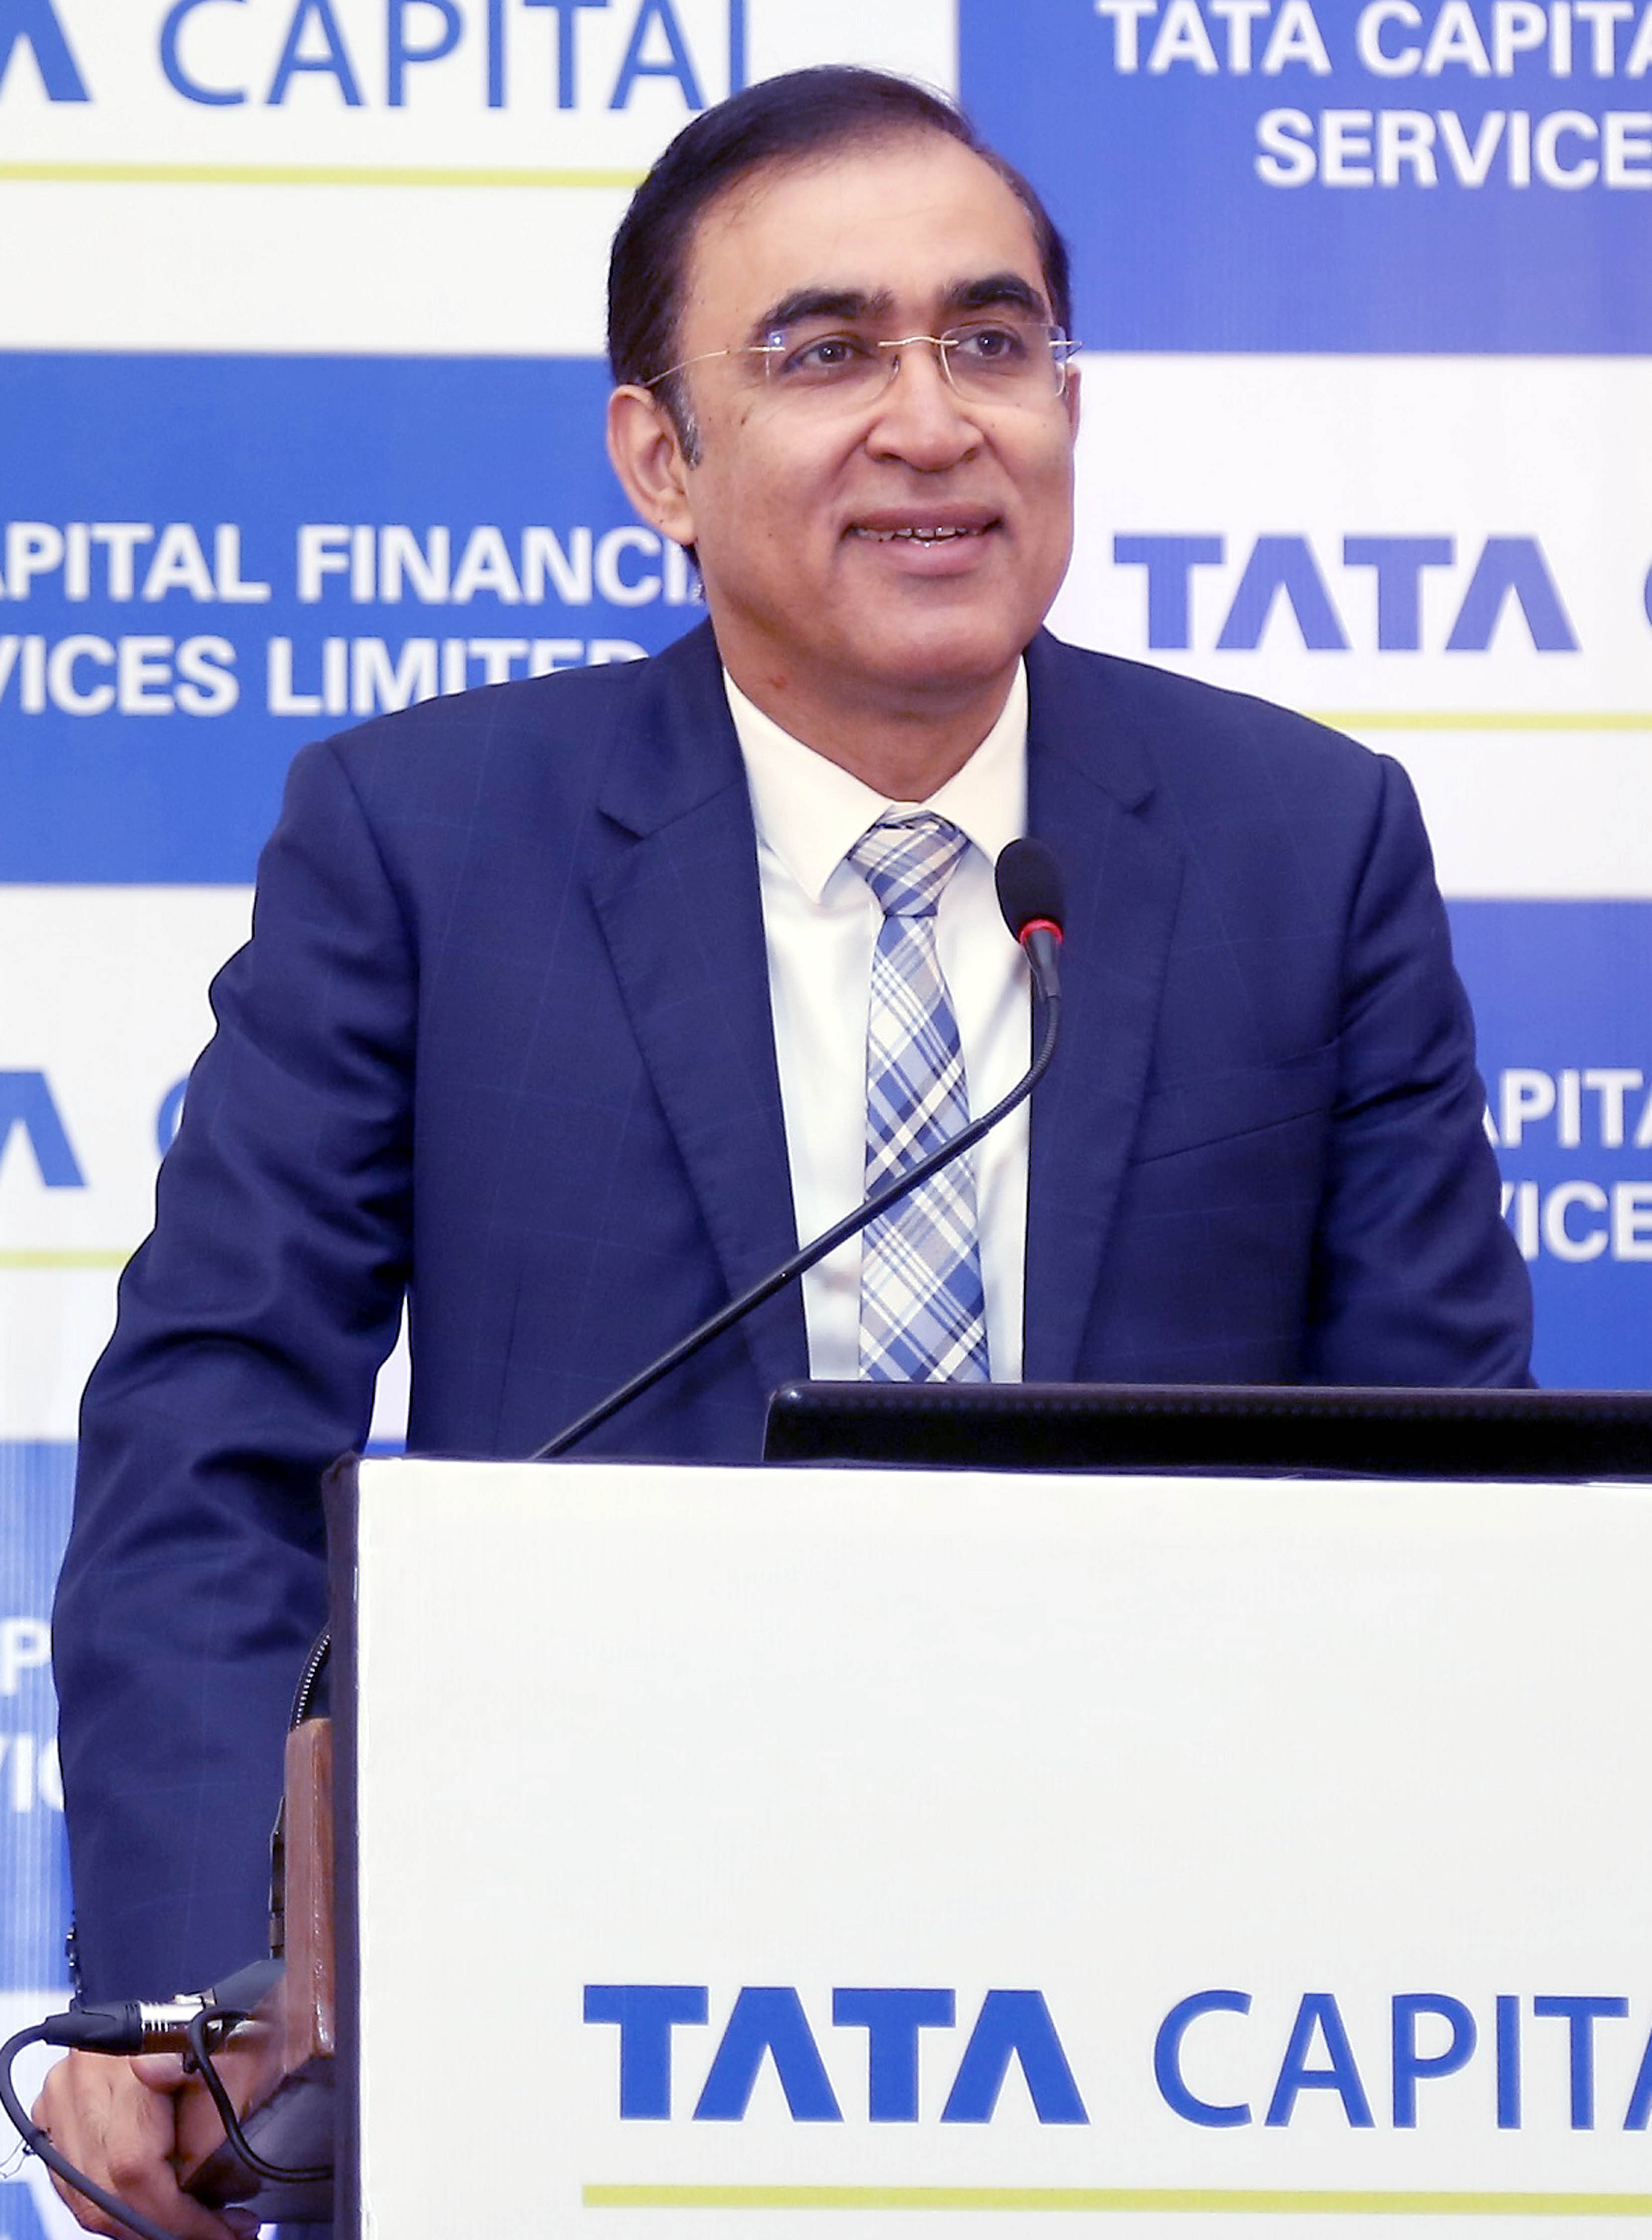 Rajiv Sabharwal (Managing Director & CEO, Tata Capital Ltd.) at the announcement of Tata Capital Financial Services Limited NCD issue.